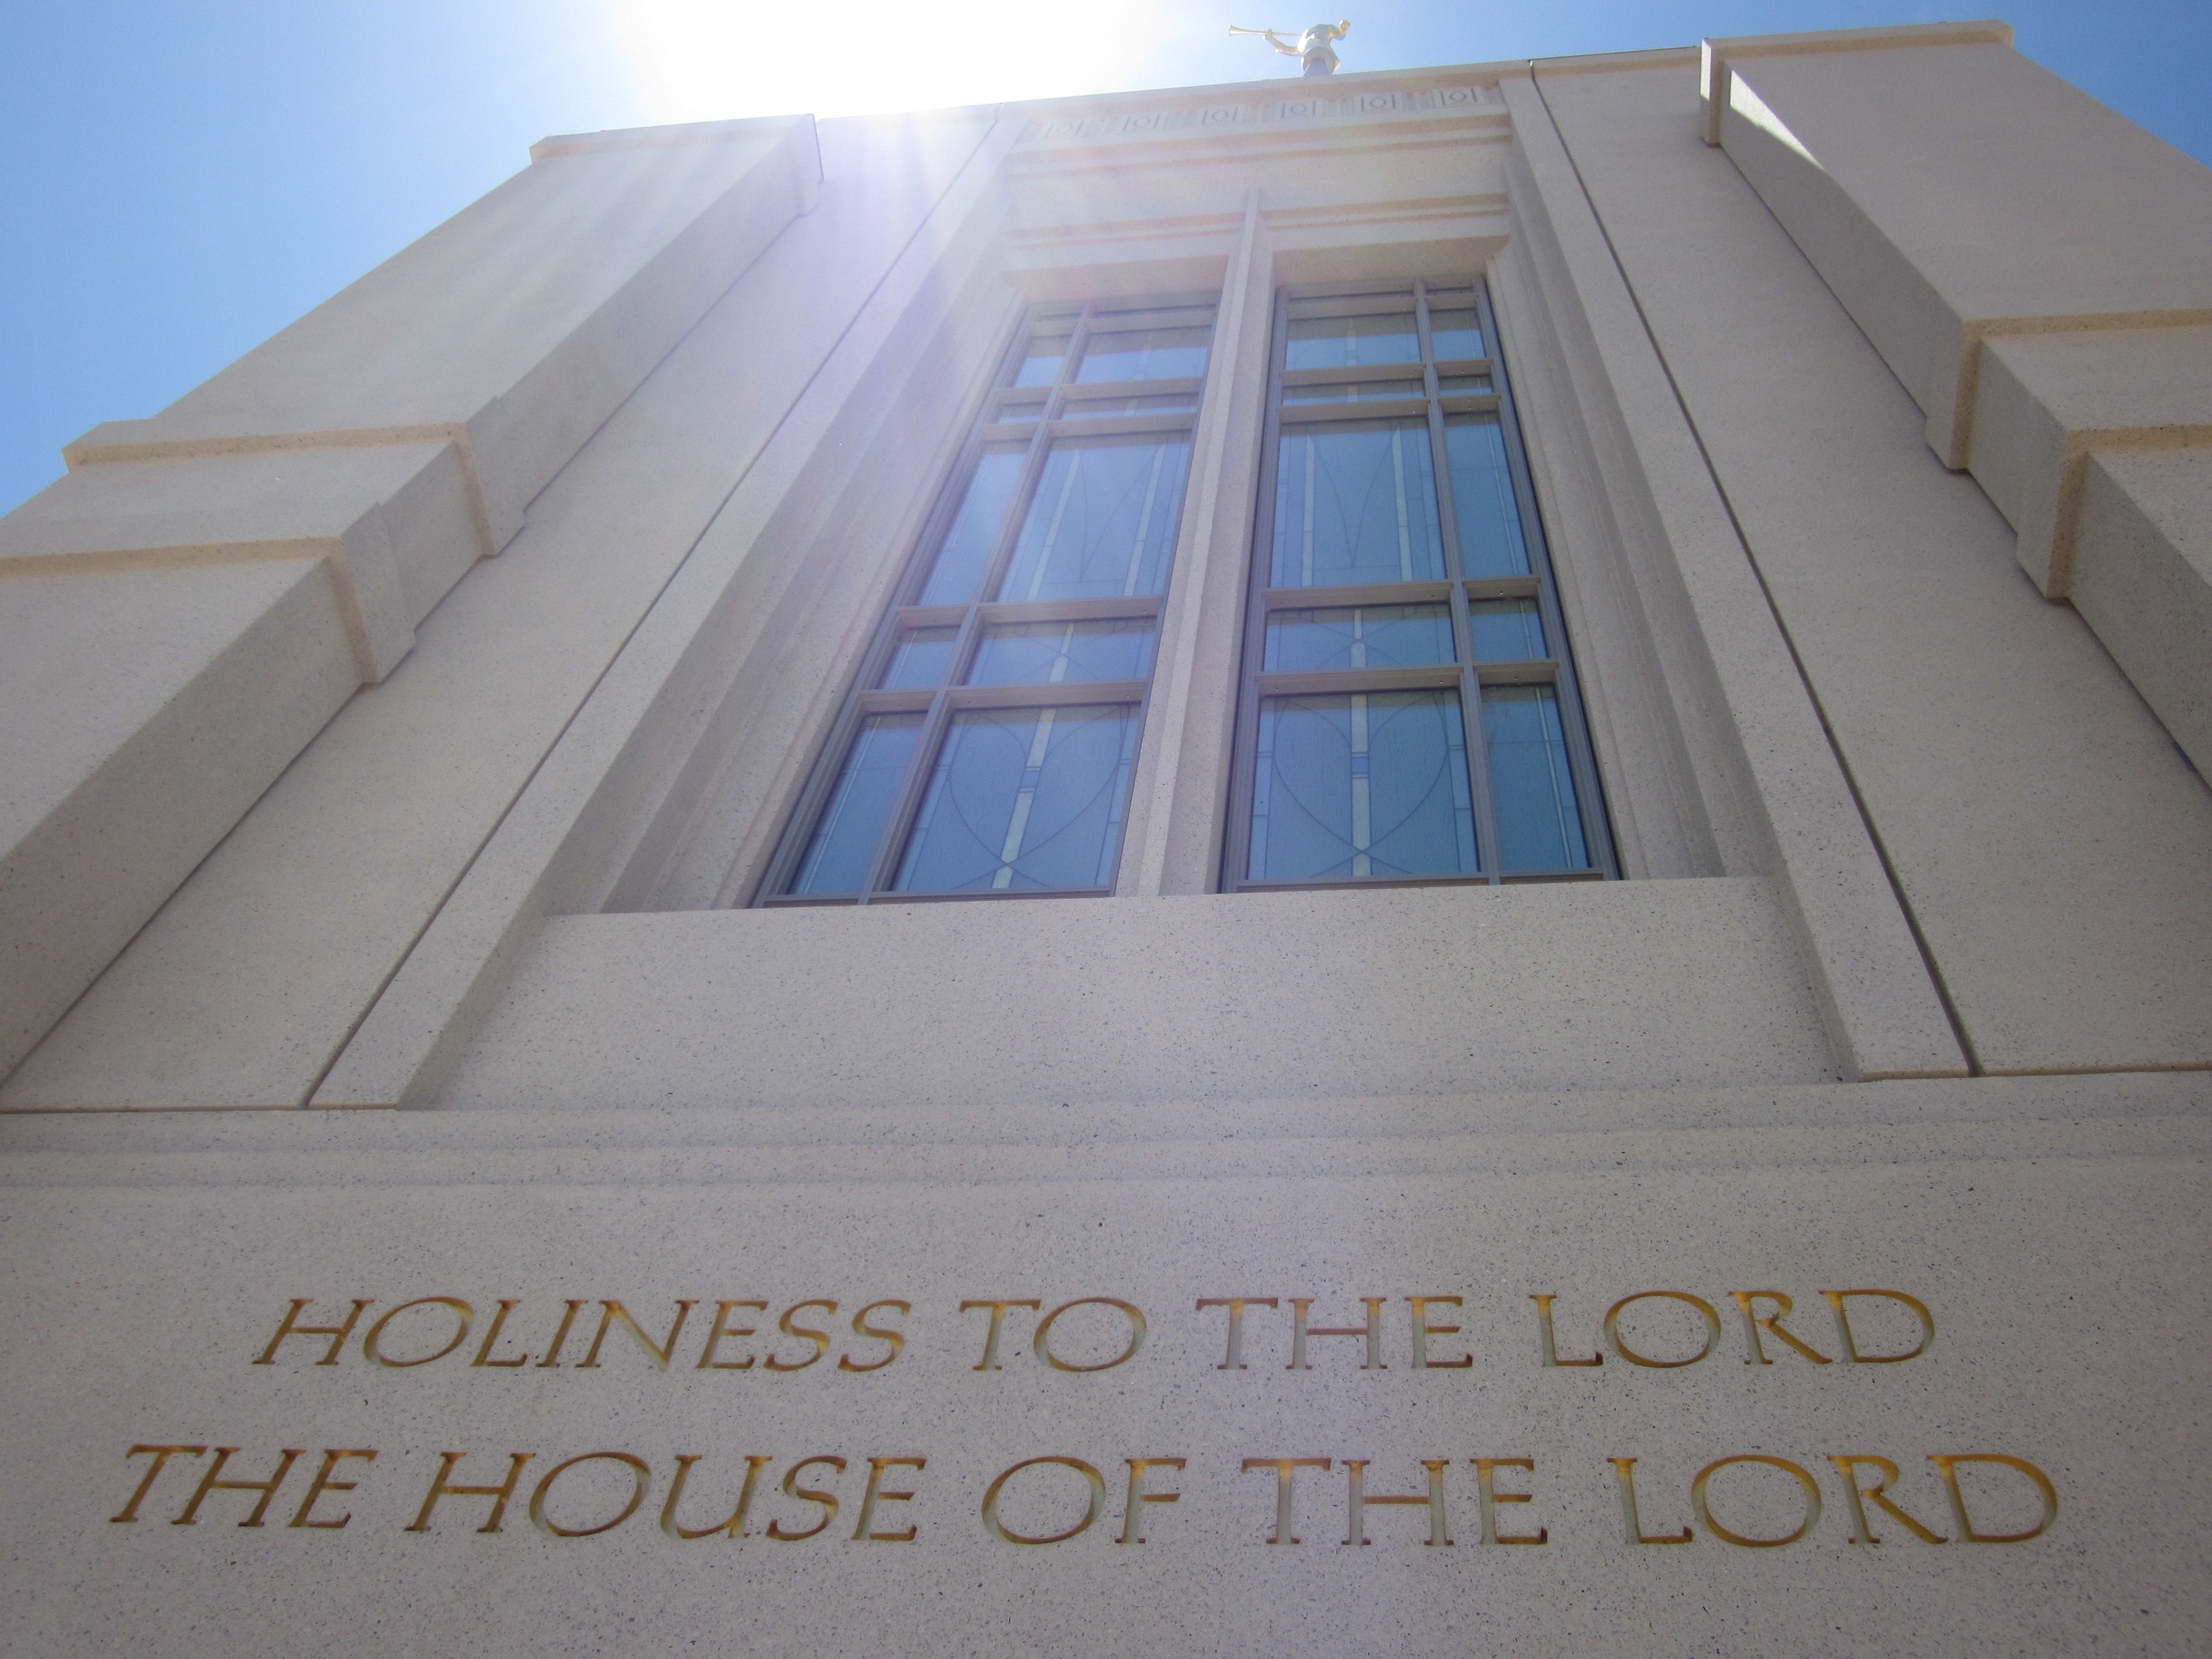 The Gila Valley Arizona Temple inscription “Holiness to the Lord: The House of the Lord” and windows.